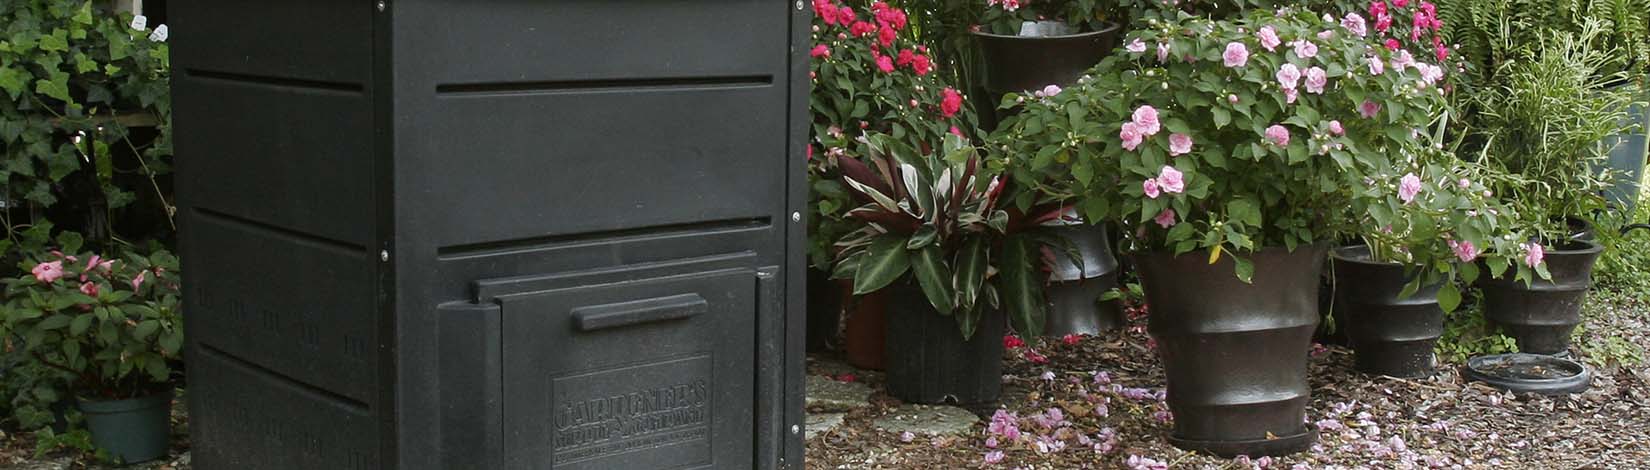 Composter in a garden for vermicomposting